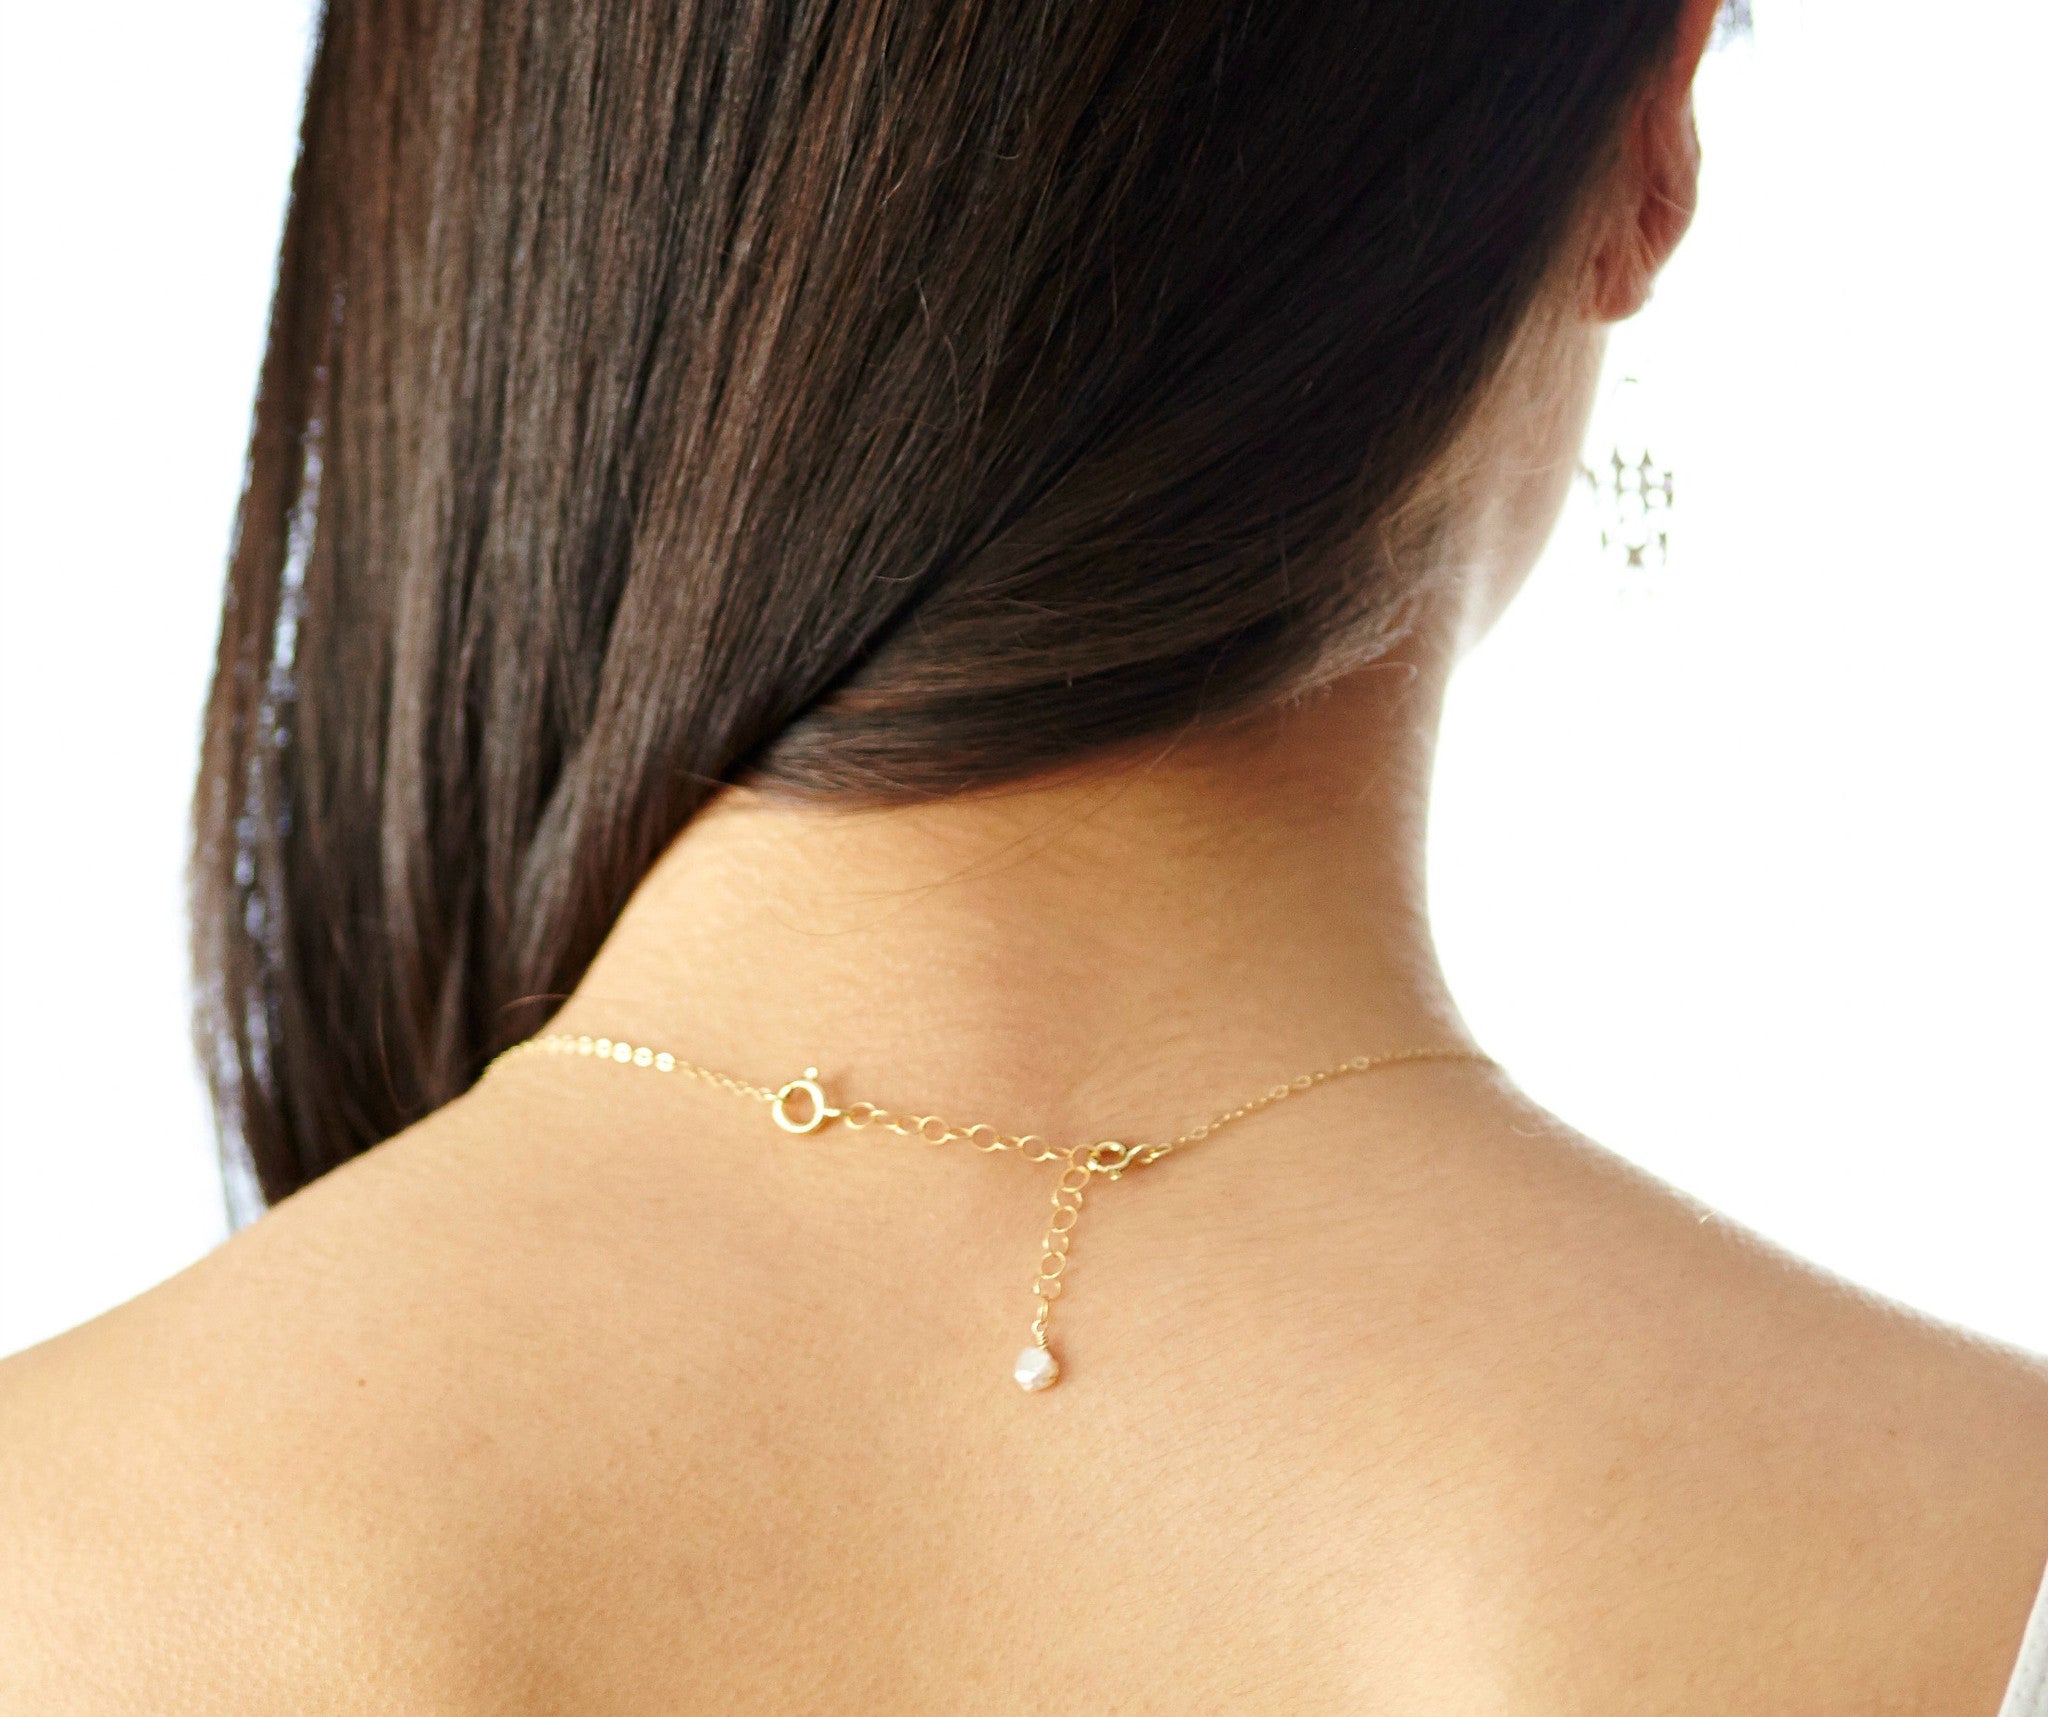 removable 2 extender chain • sterling silver or 14k gold filled